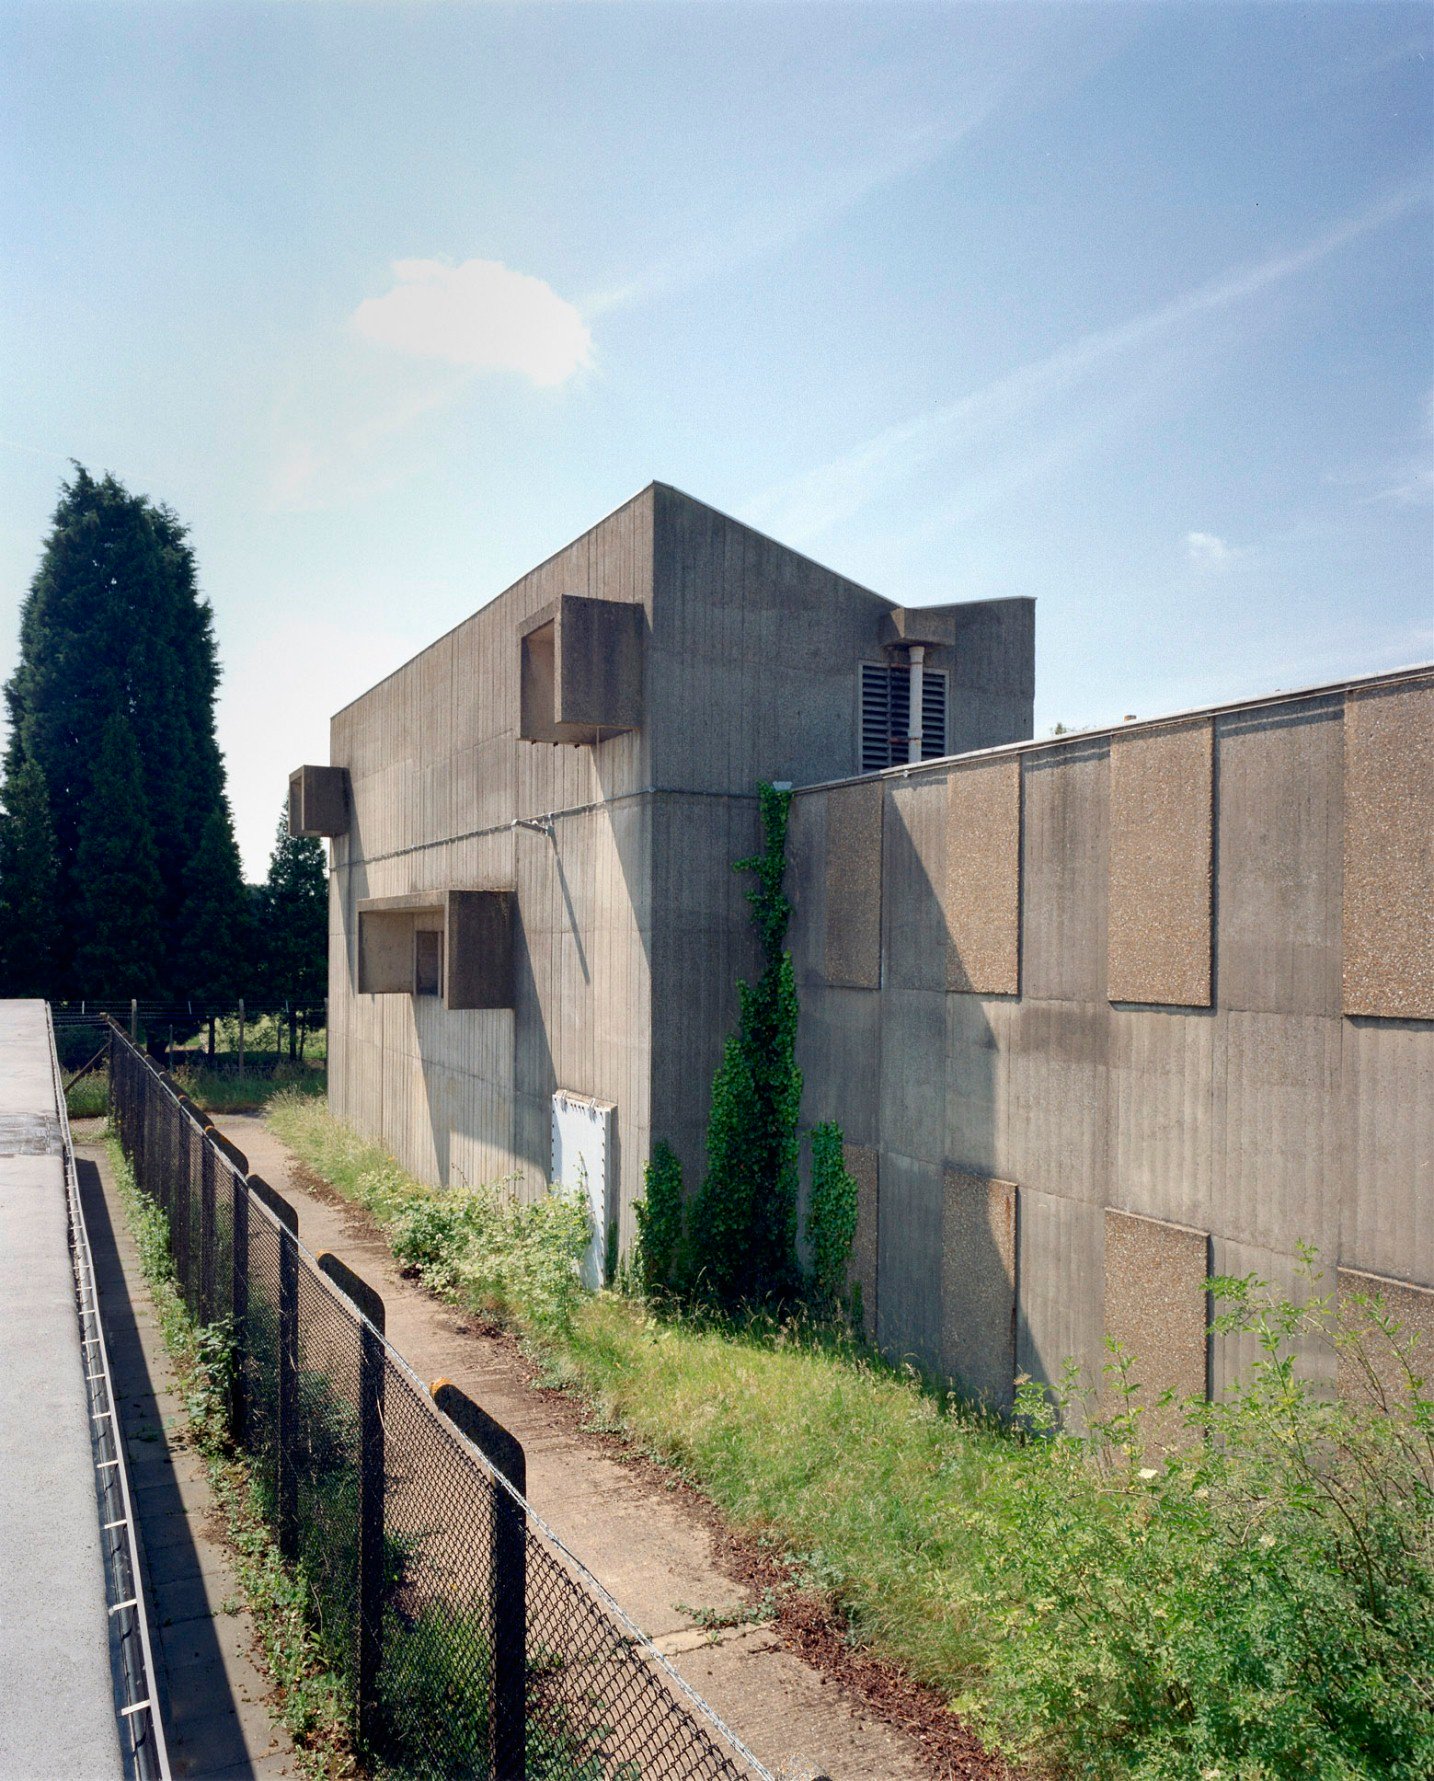 Cambridge, Regional Seat of Government, in the early 1960s a heavily protected emergency bunker was built to accommodate around 400 people, listed Grade 2.